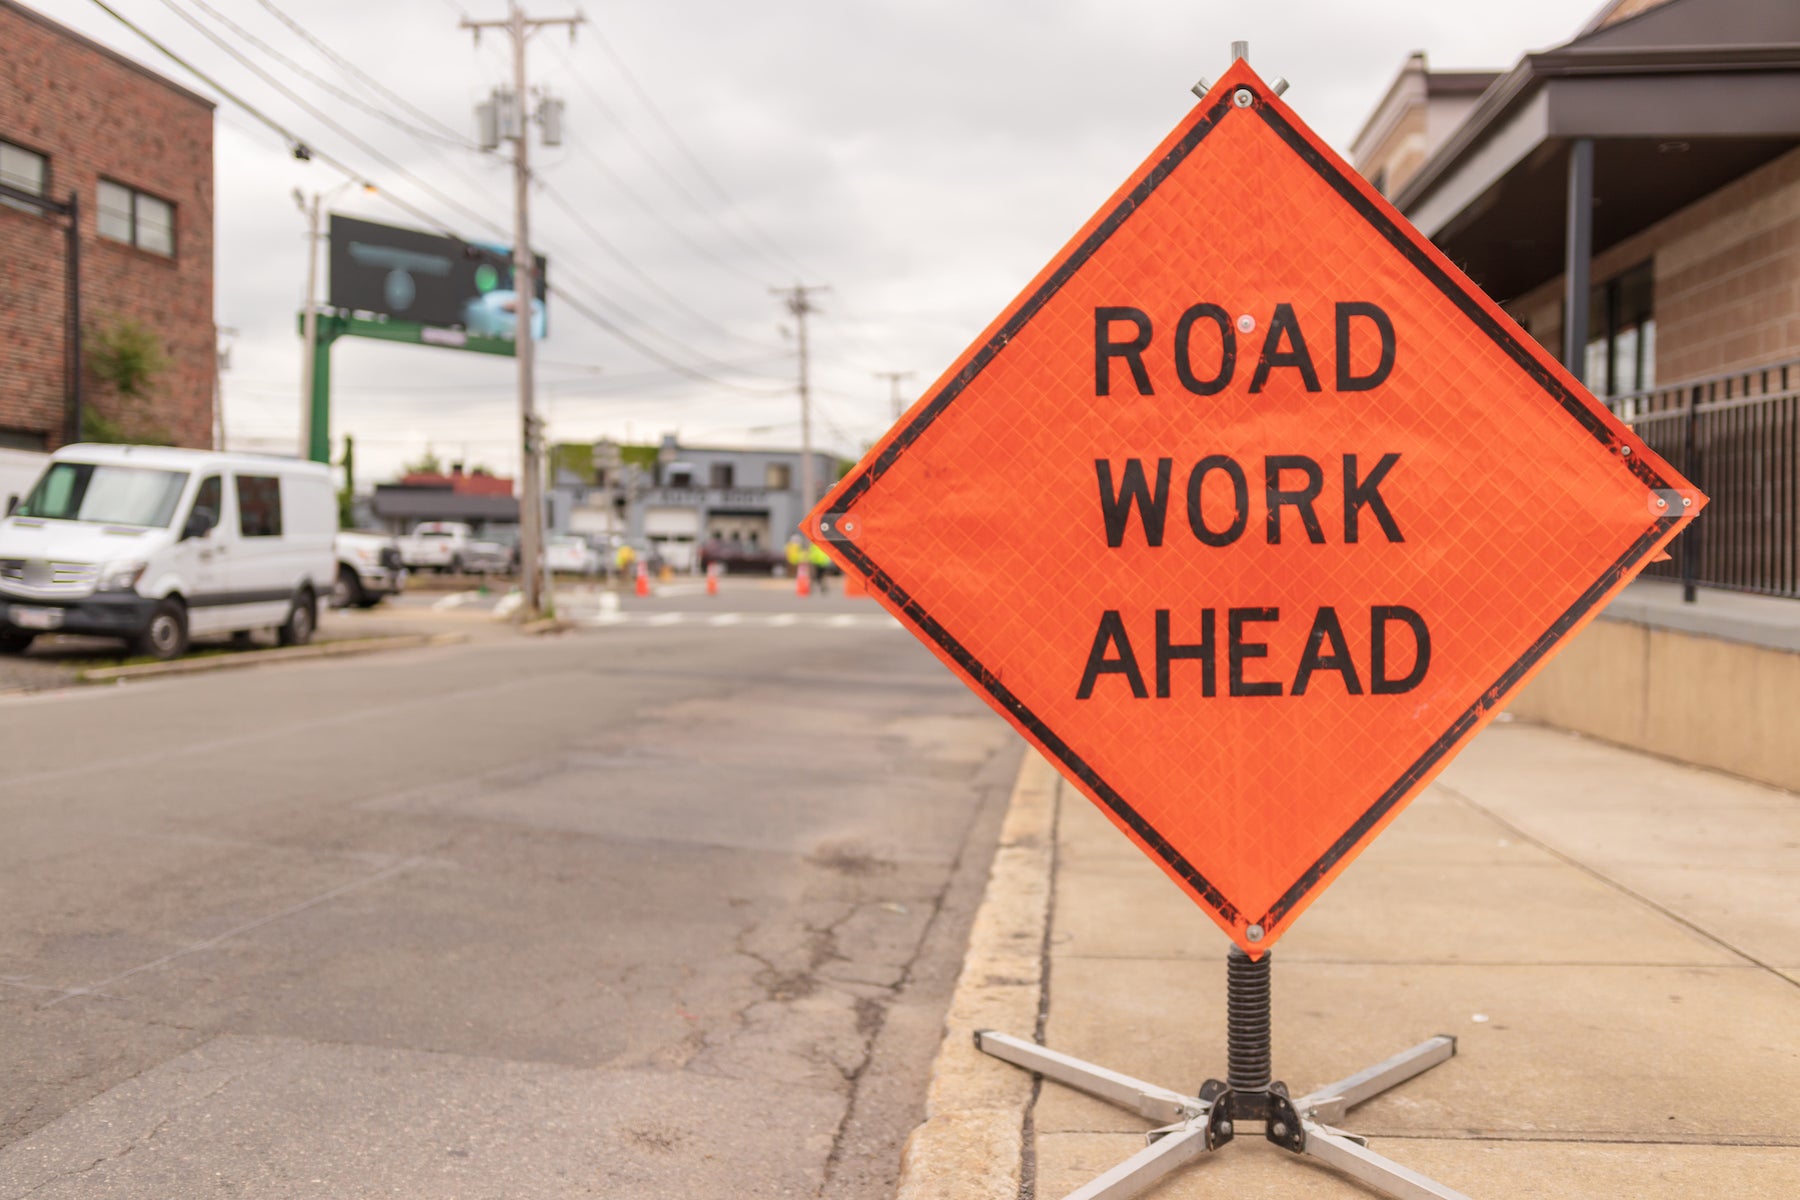 What to Do When You See a Road Work Ahead Sign